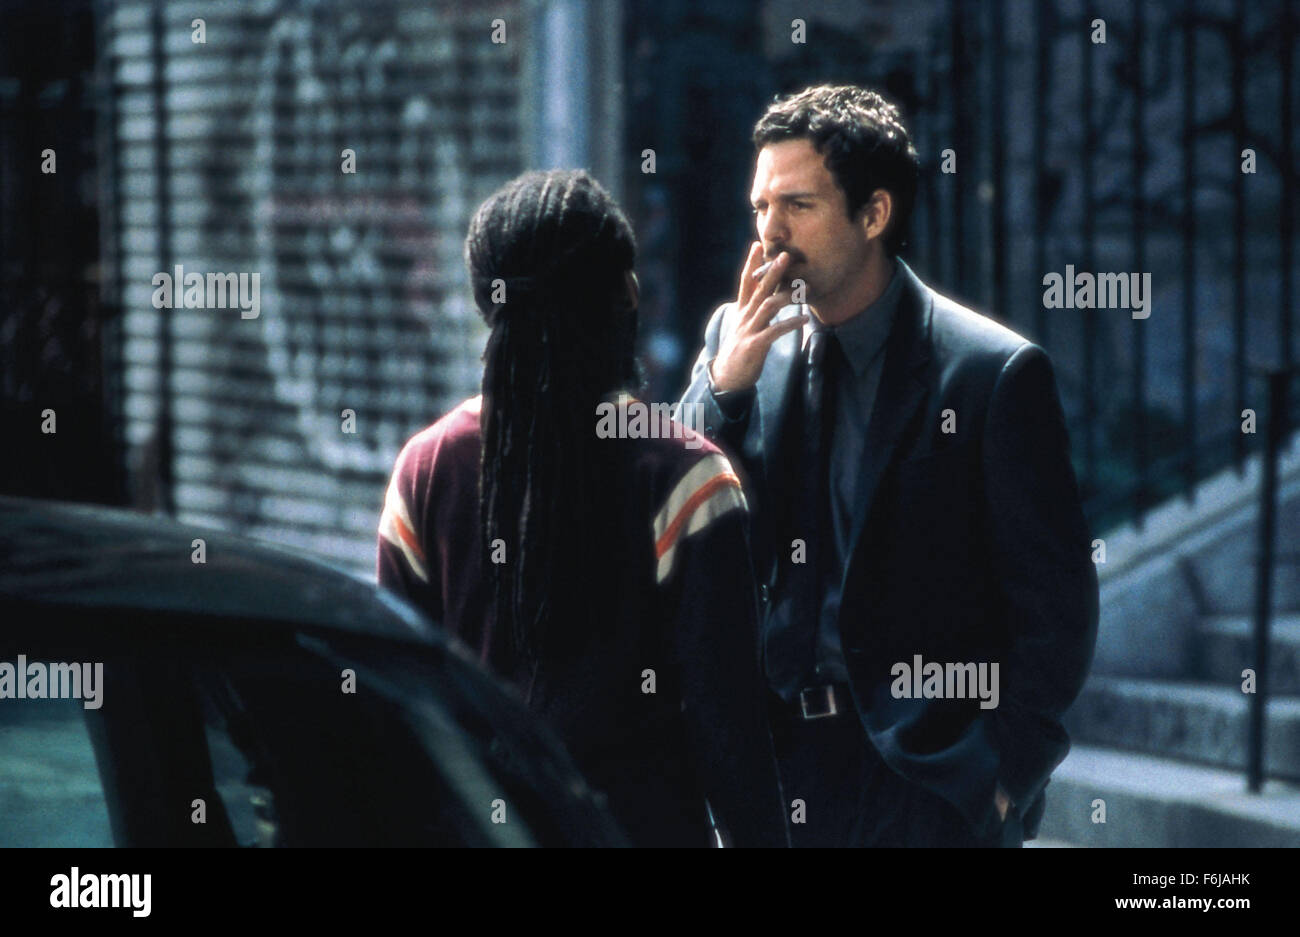 Jul 05, 2003; Hollywood, CA, USA; MARK RUFFALO stars as Detective Giovanni Malloy in the thrilling crime mystery 'In the Cut' directed by Jane Campion. Stock Photo